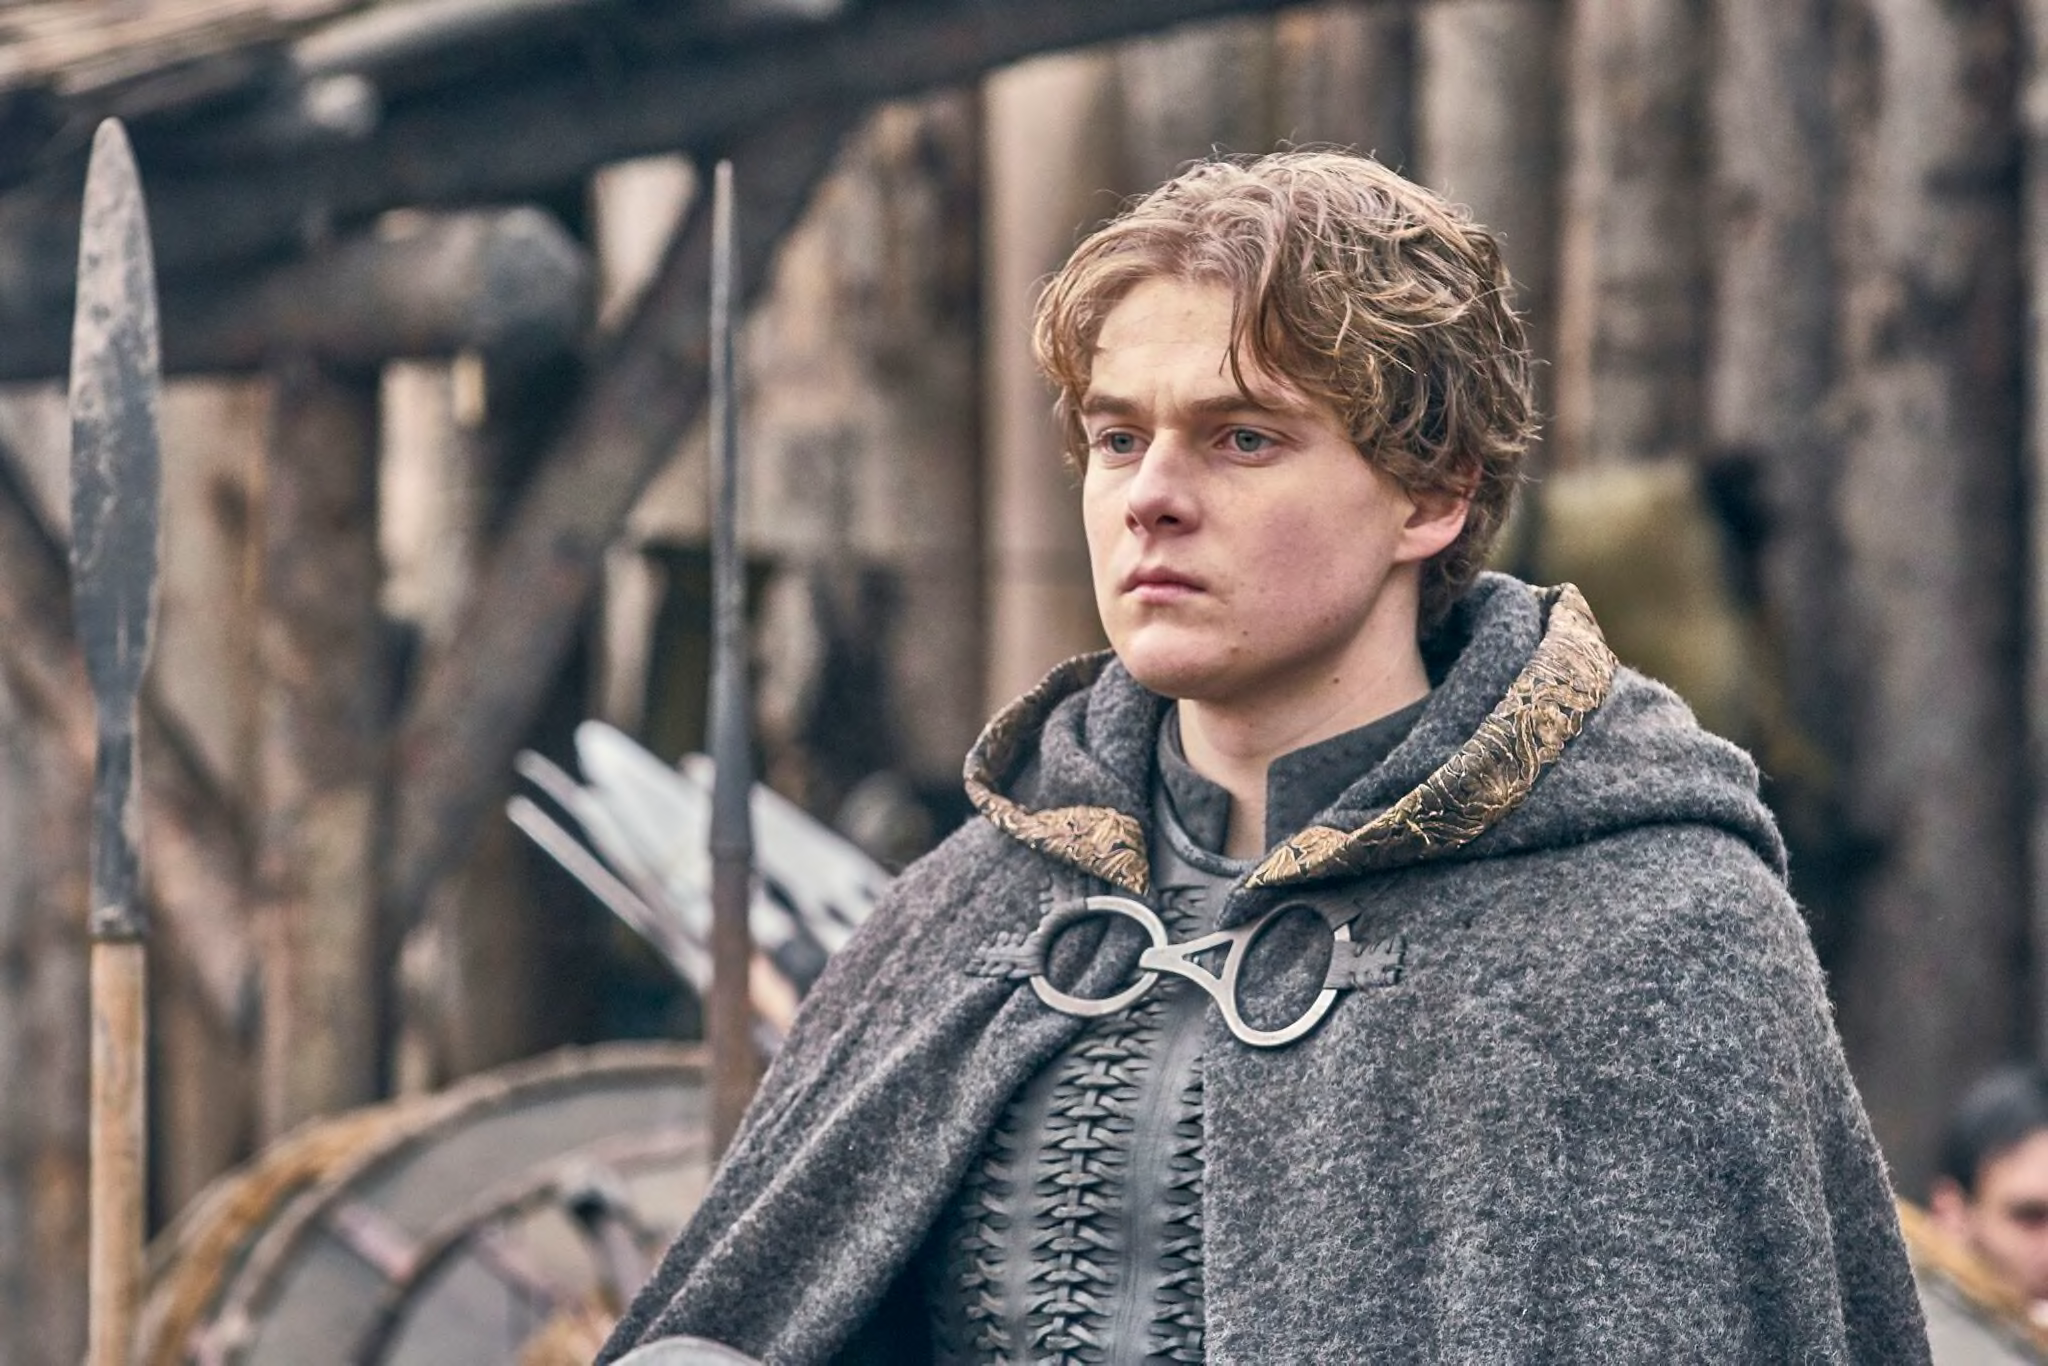 Where Does Netflix's The Last Kingdom Film Align With History?